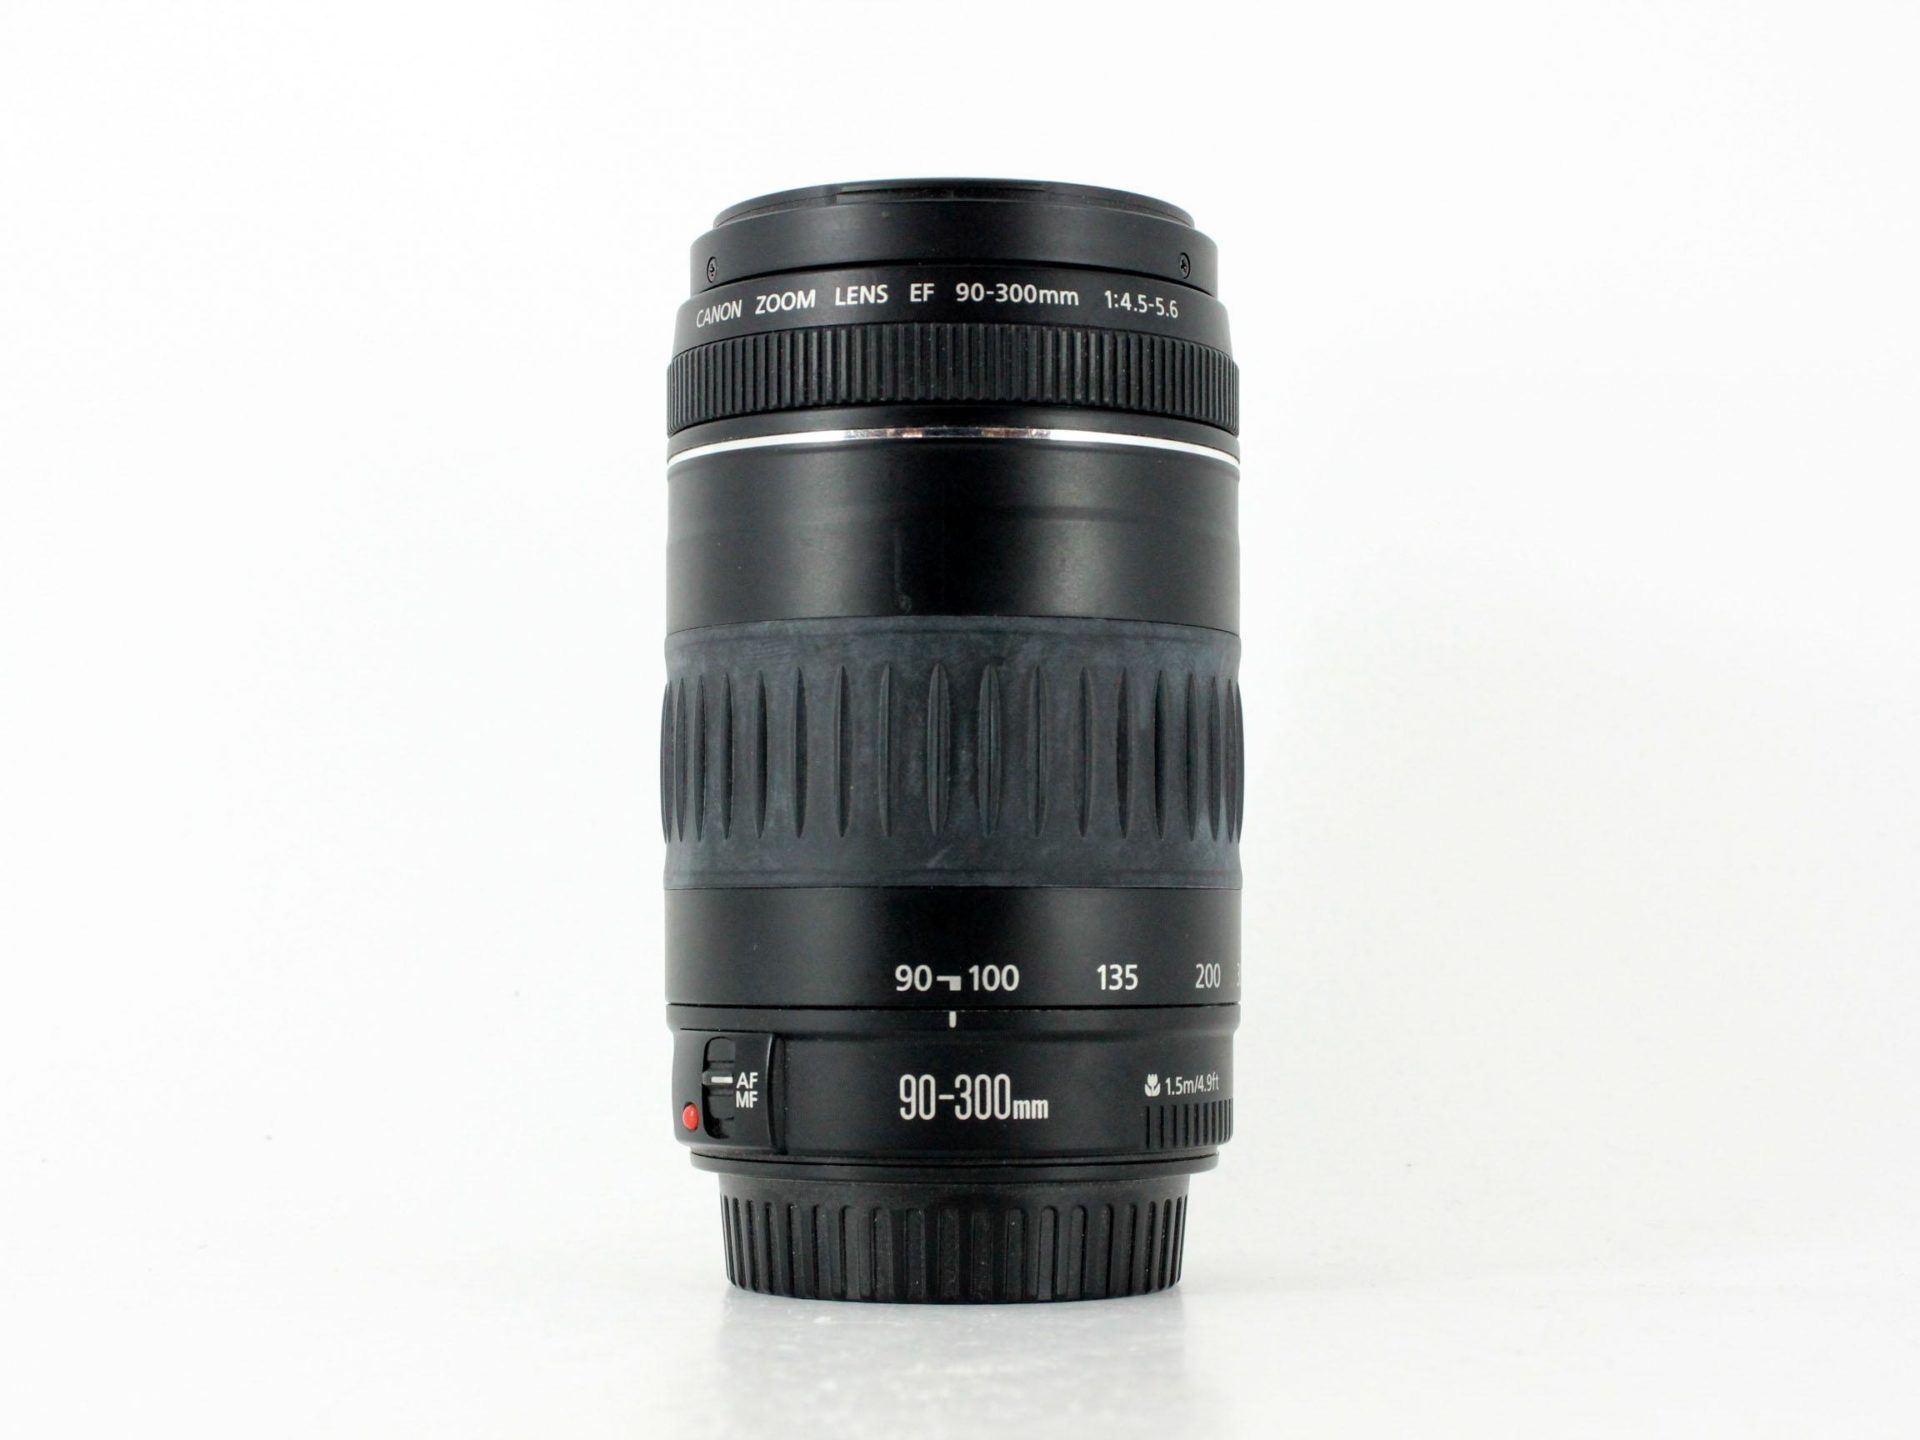 Canon EF 90-300mm F/4.5-5.6 Lens Lenses and Cameras